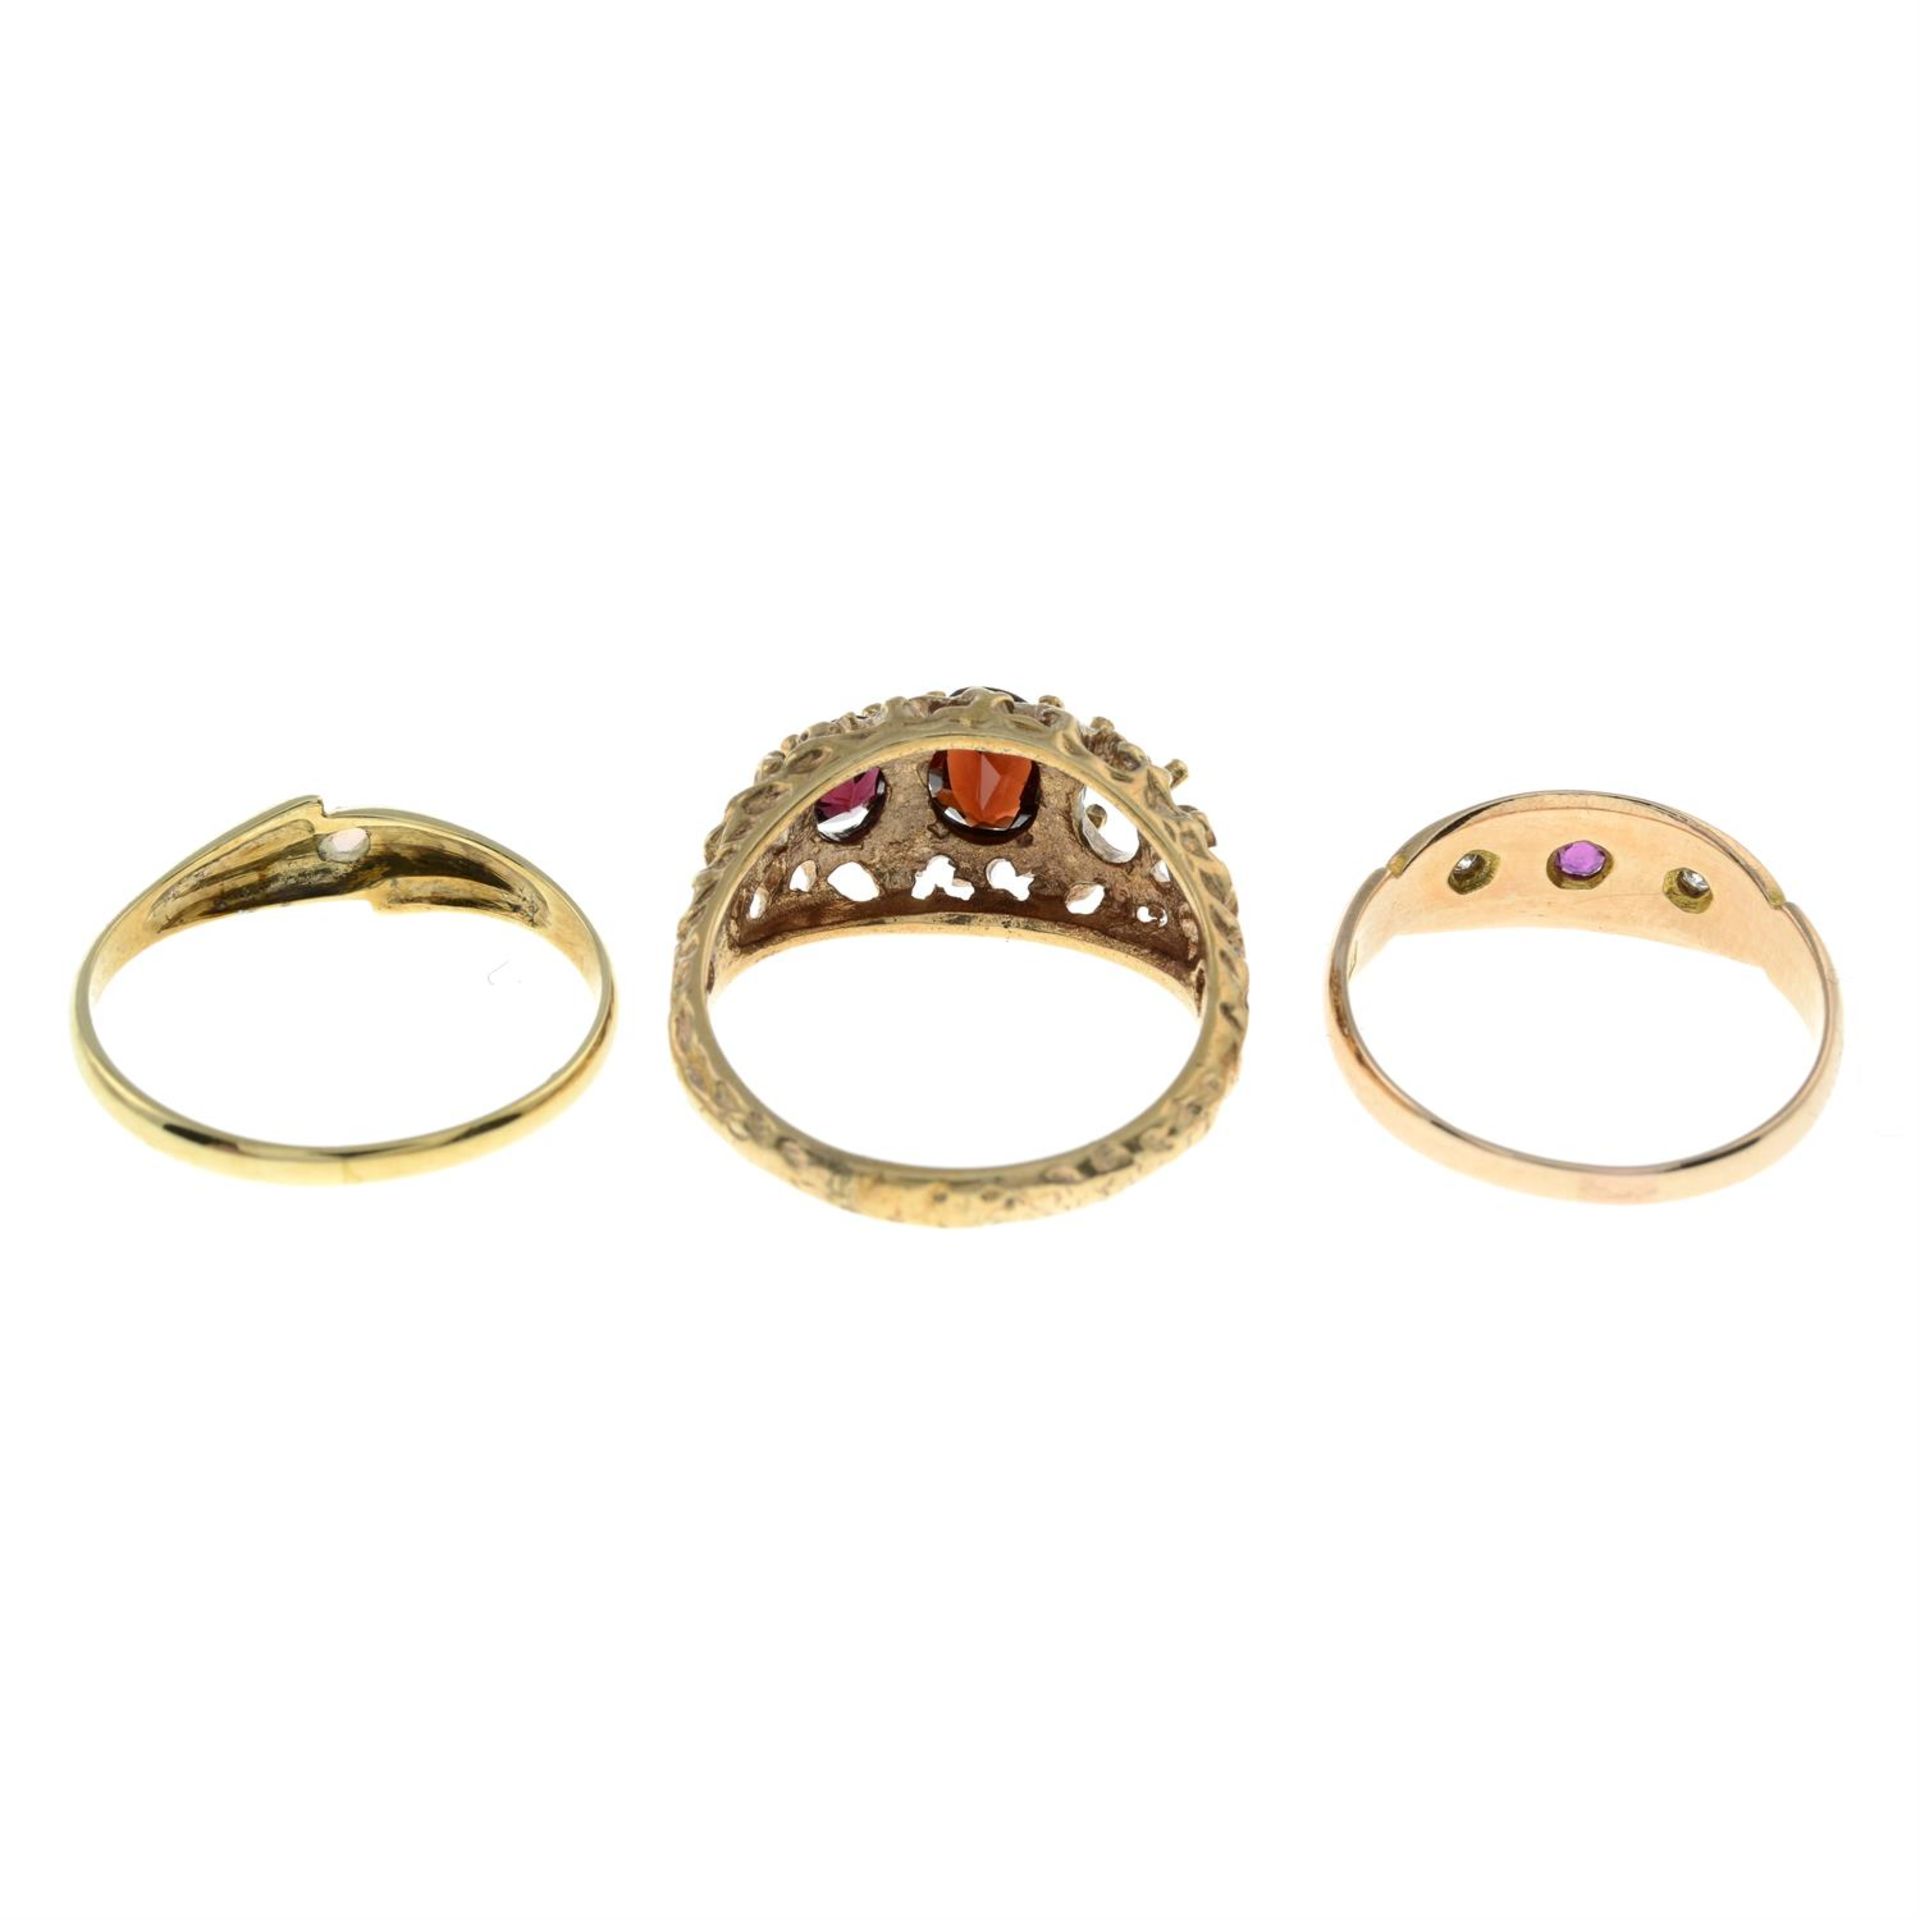 An early 20th century 15ct gold multi-gem ring, together with two later gem-set rings. - Image 2 of 2